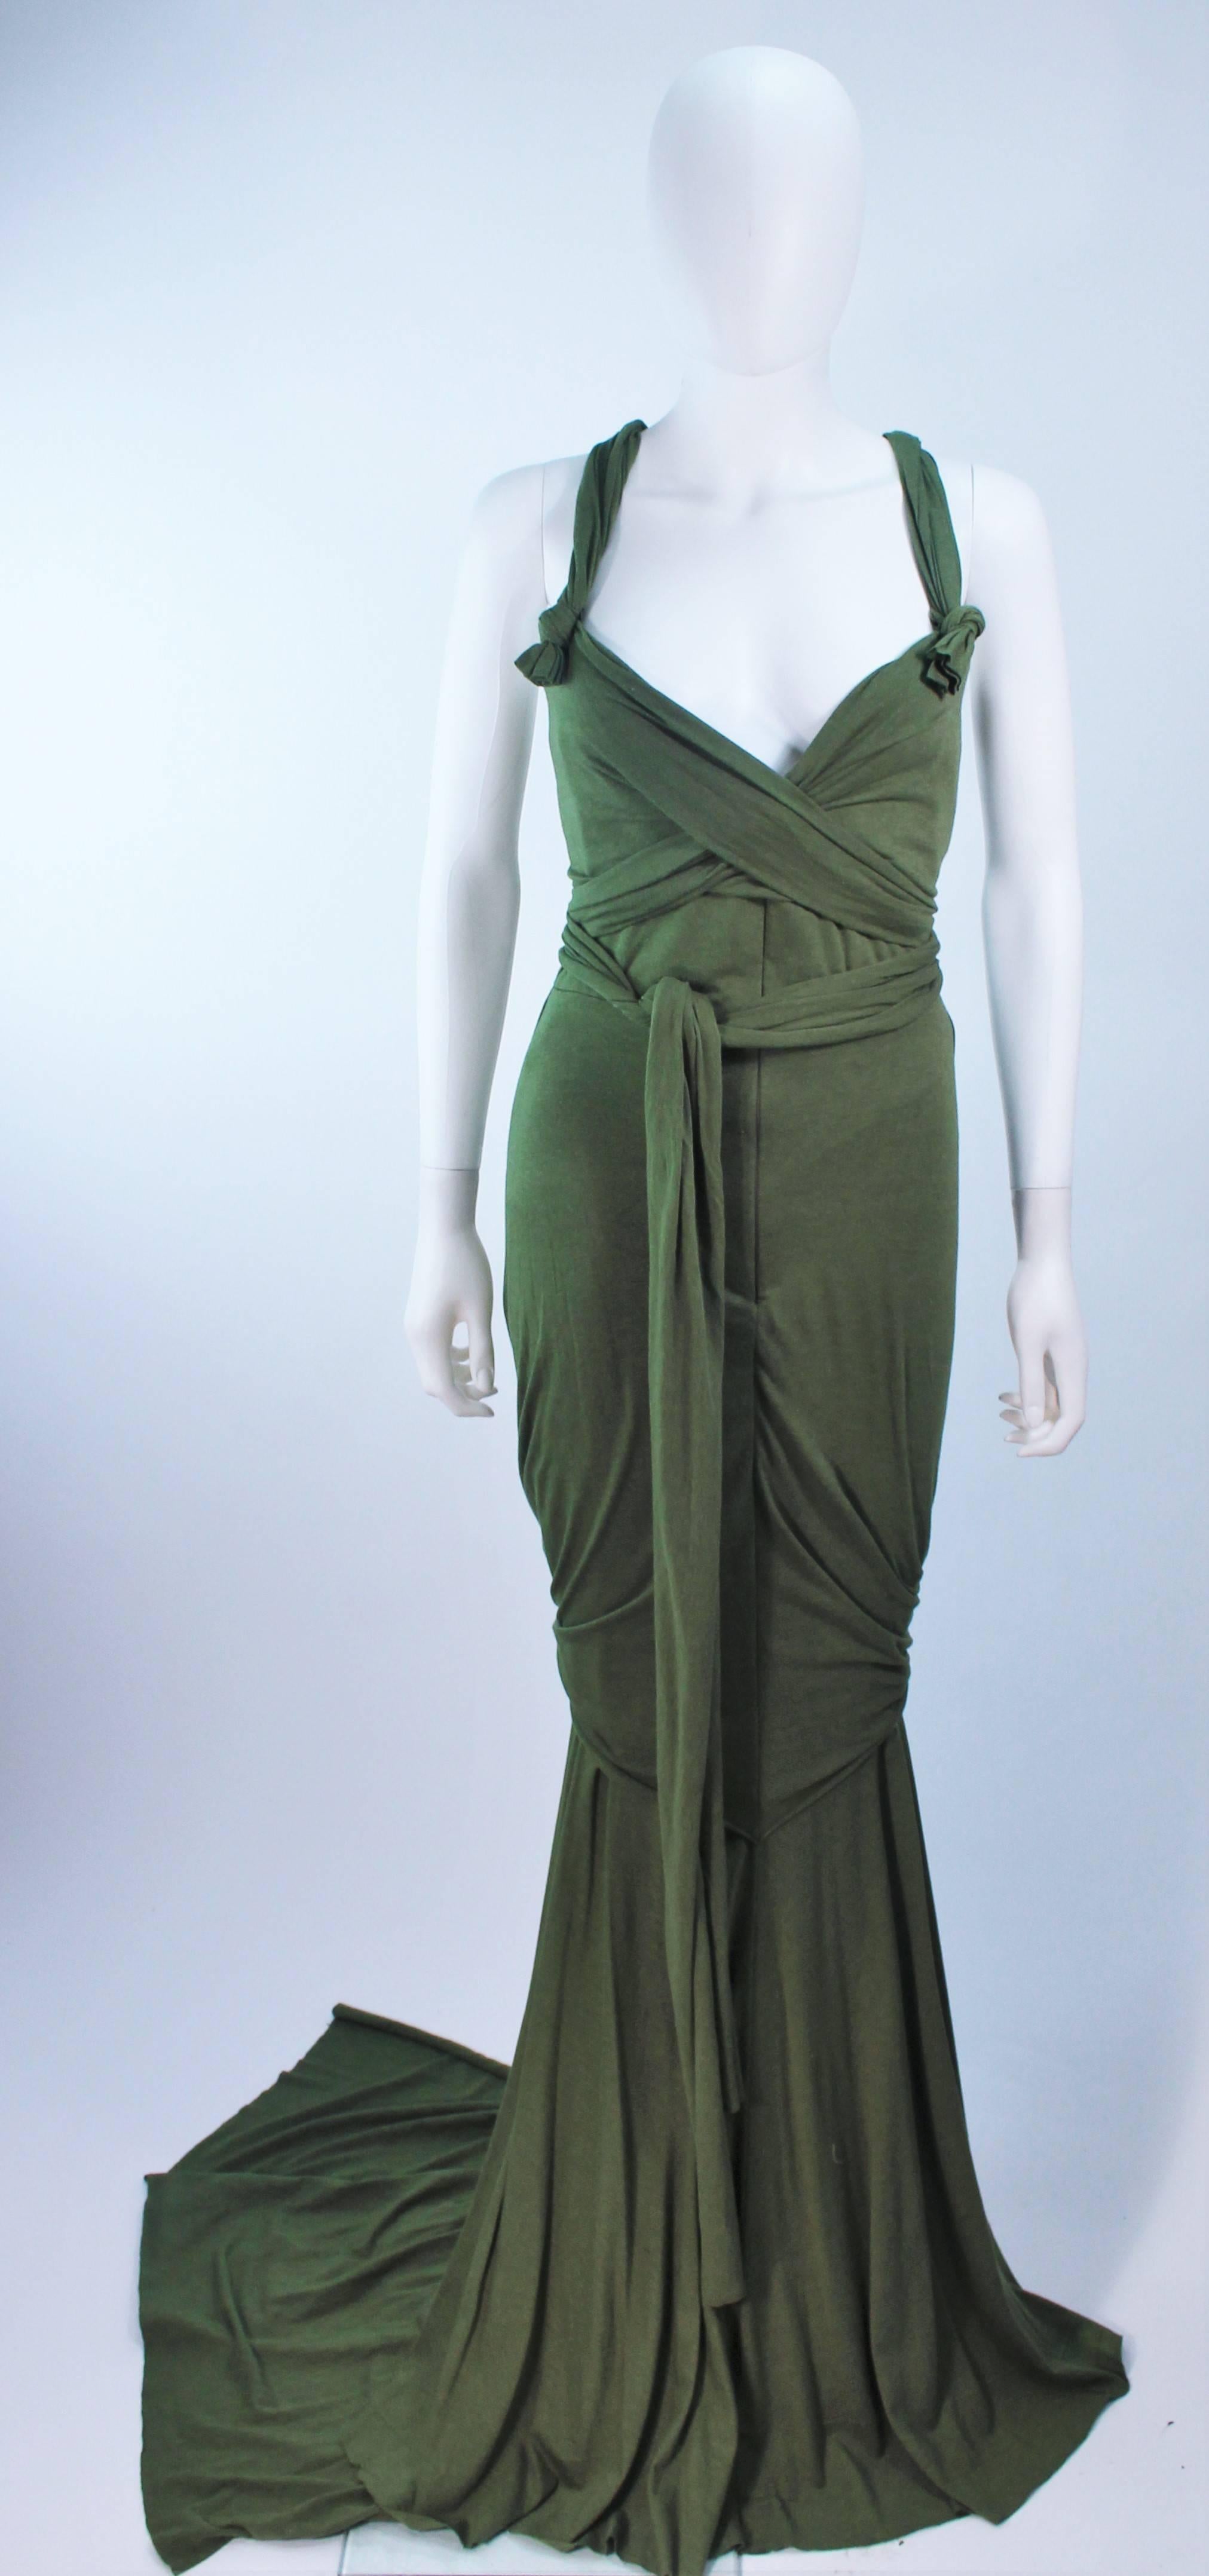 This Elizabeth Mason Couture gown is composed of bamboo jersey. Features a wrap style with a drop neckline. may be fashioned in a variety of colors.

The gown may be fashioned in a variety of colors.

This is a couture custom order. Please allow for